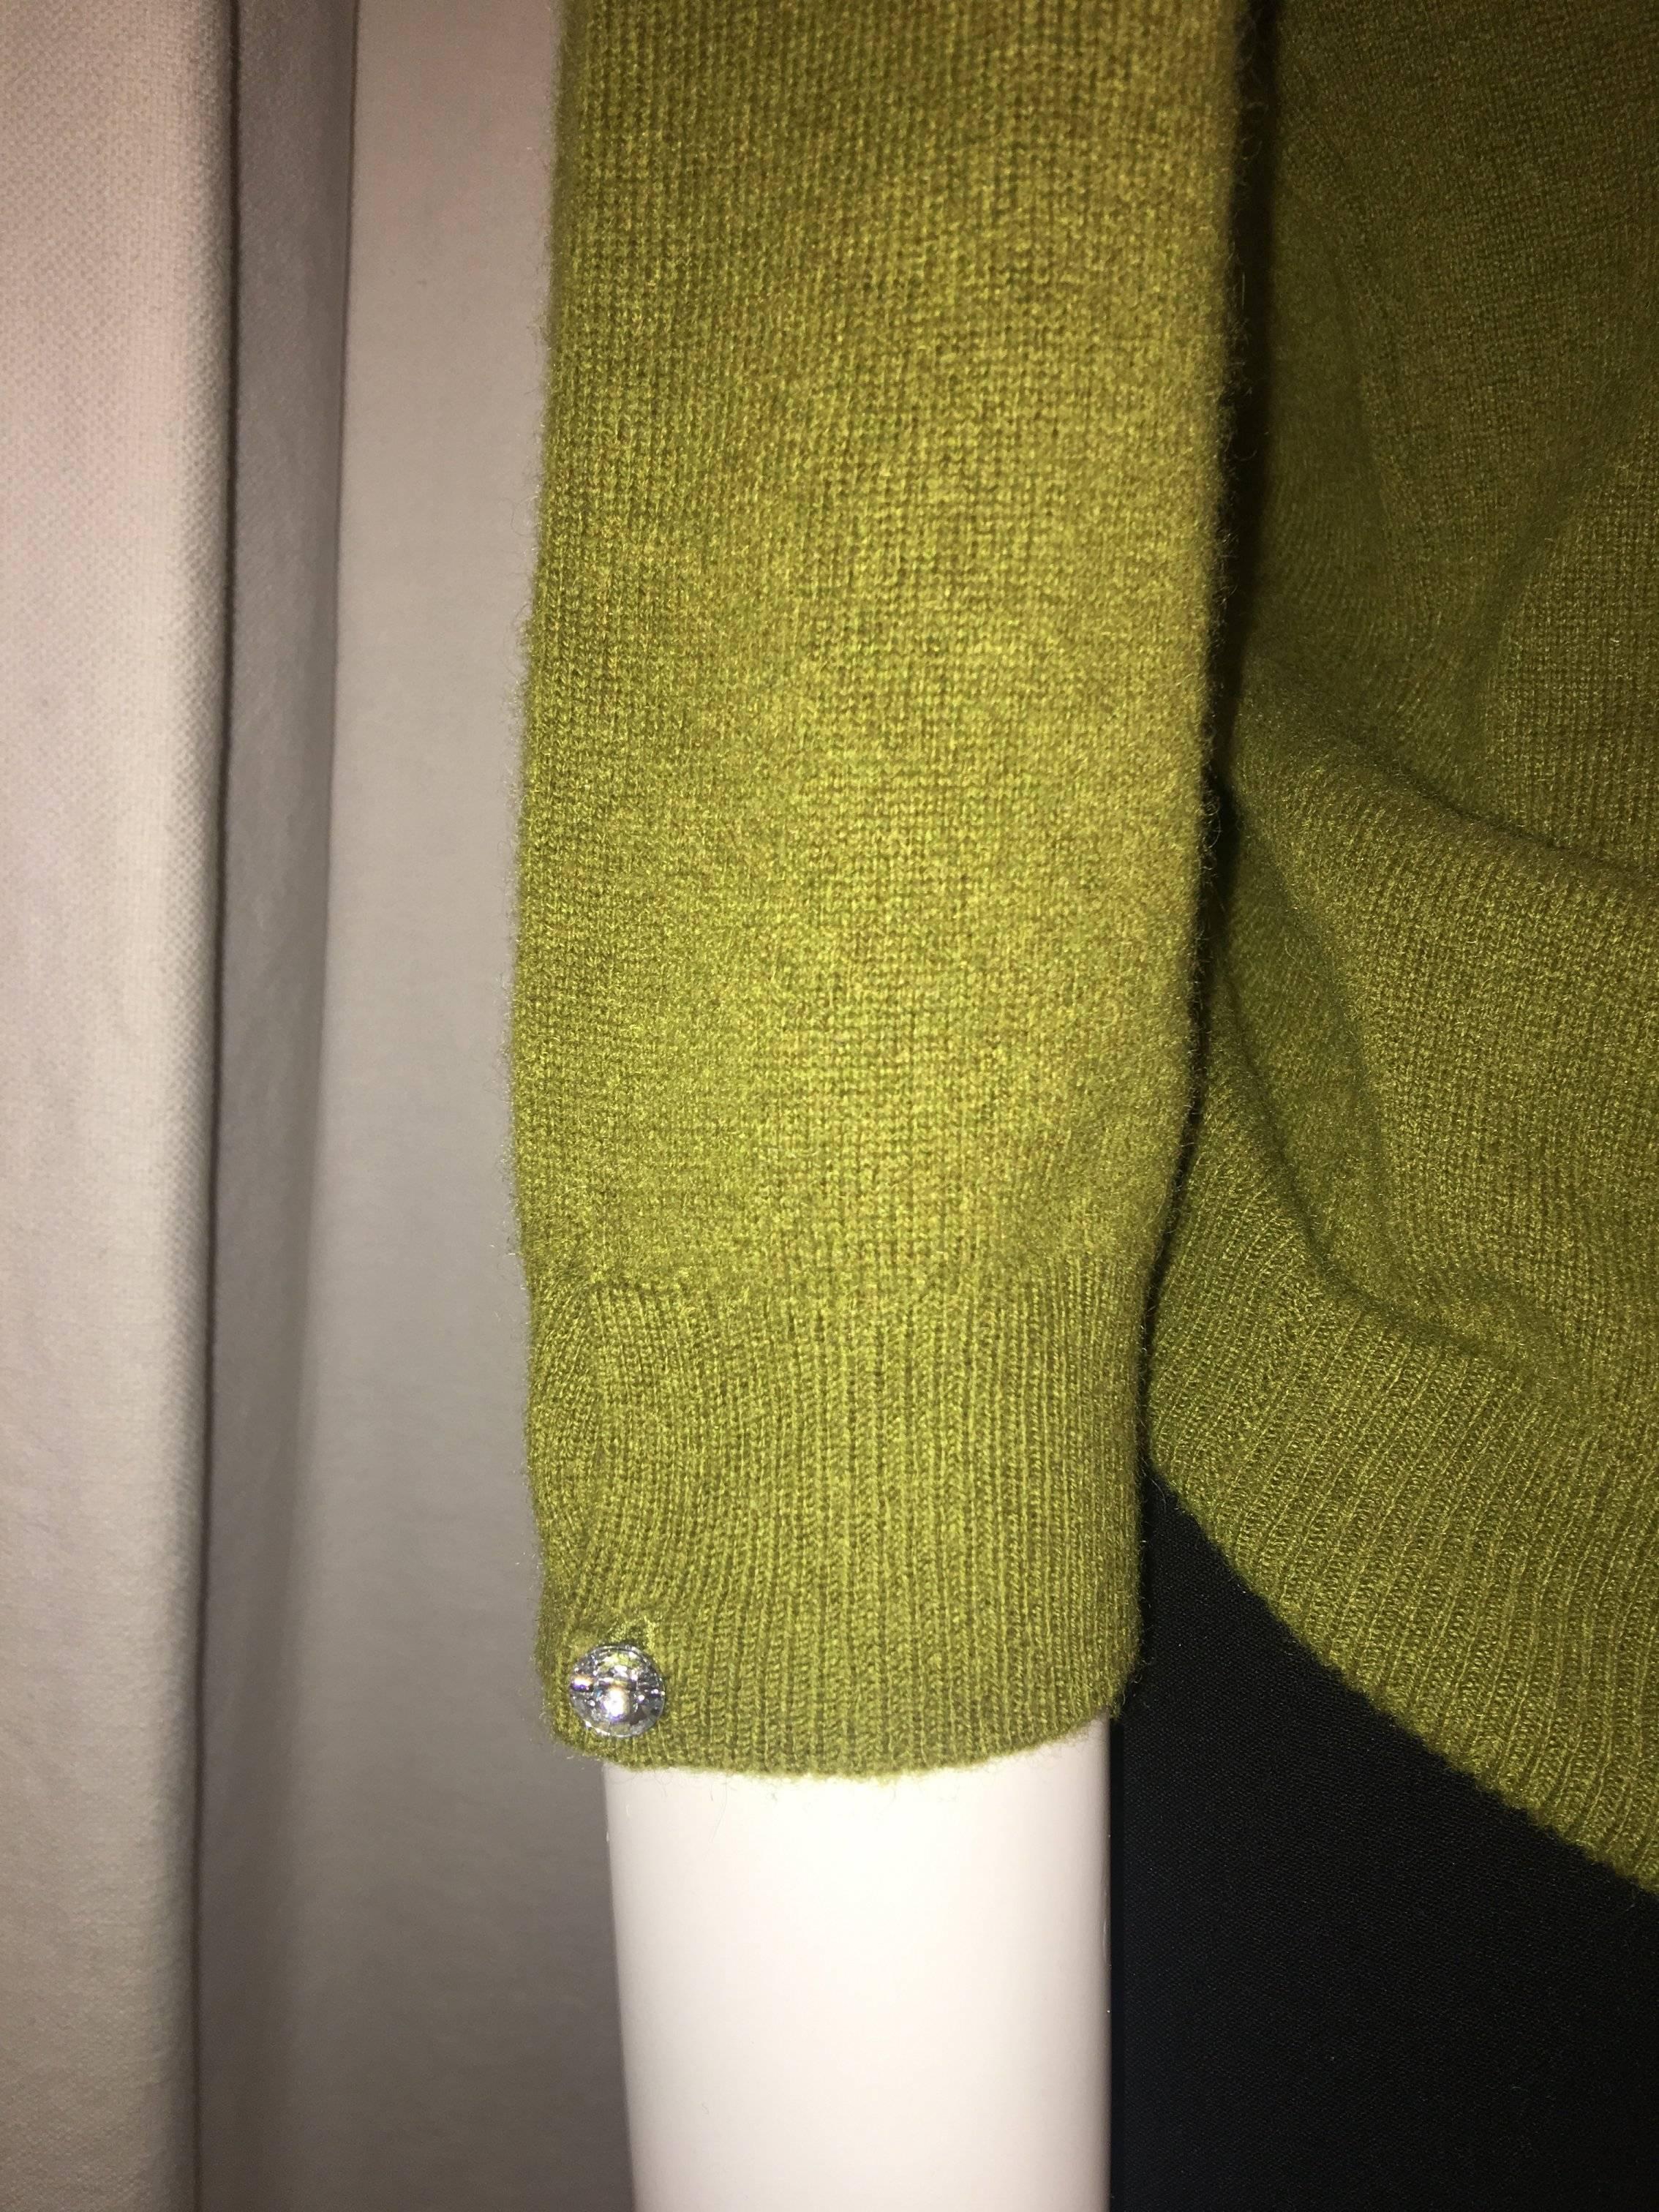 Magaschoni Cashmere Sweater with 3/4 Sleeves and Rhinestone Accent at cuff. 